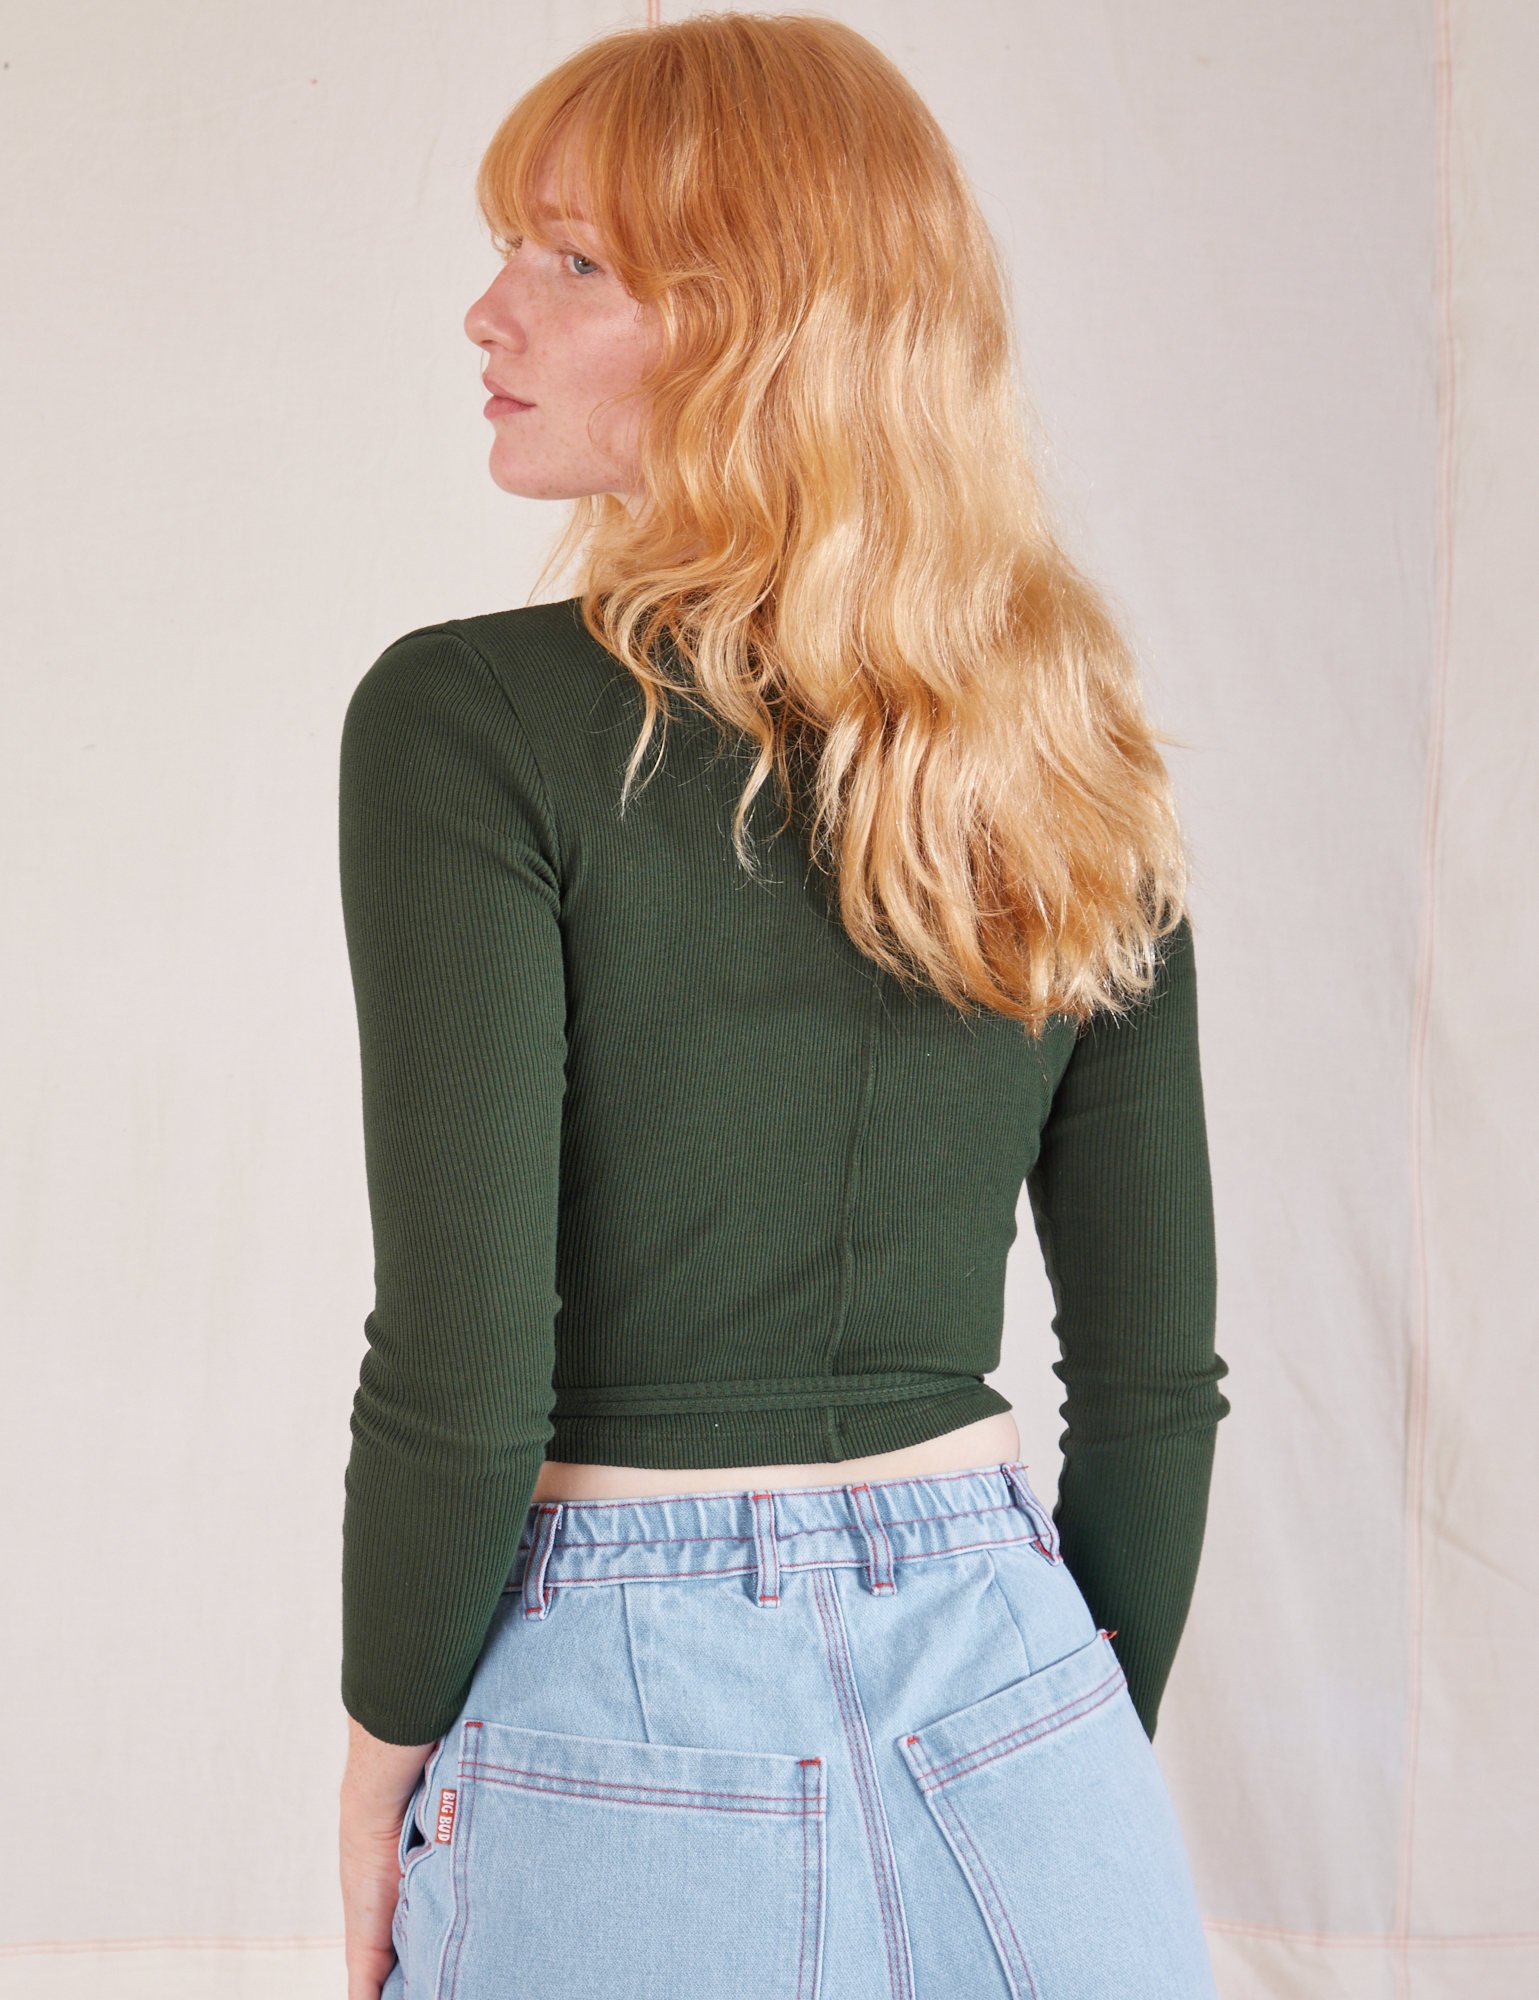 Wrap Top in Swamp Green back view on Margaret